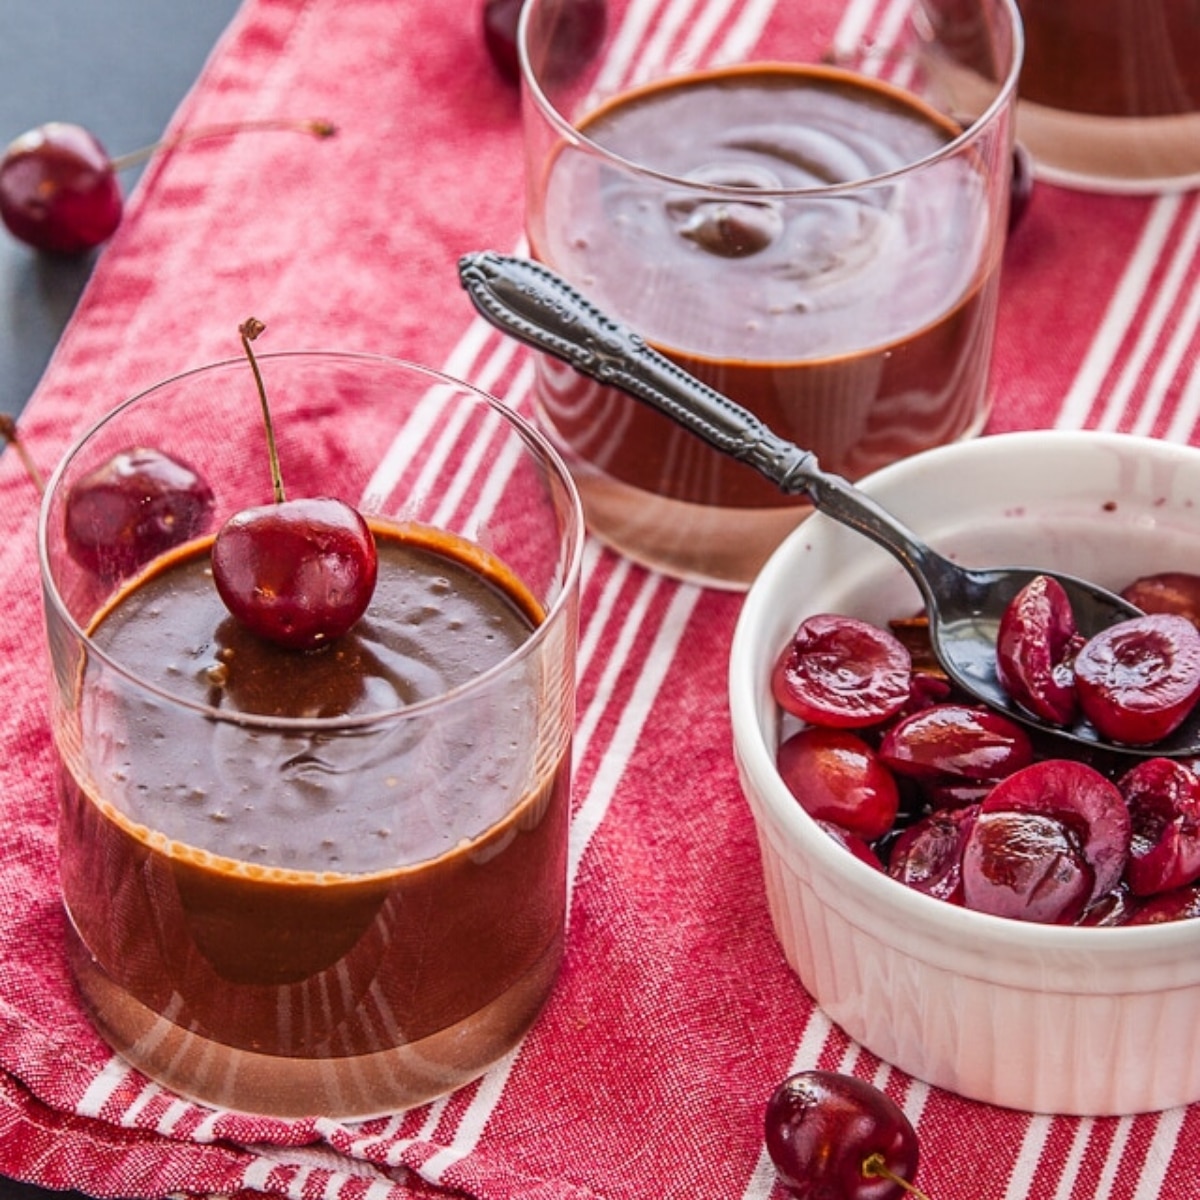 Chocolate pots de creme with red wine poached cherries